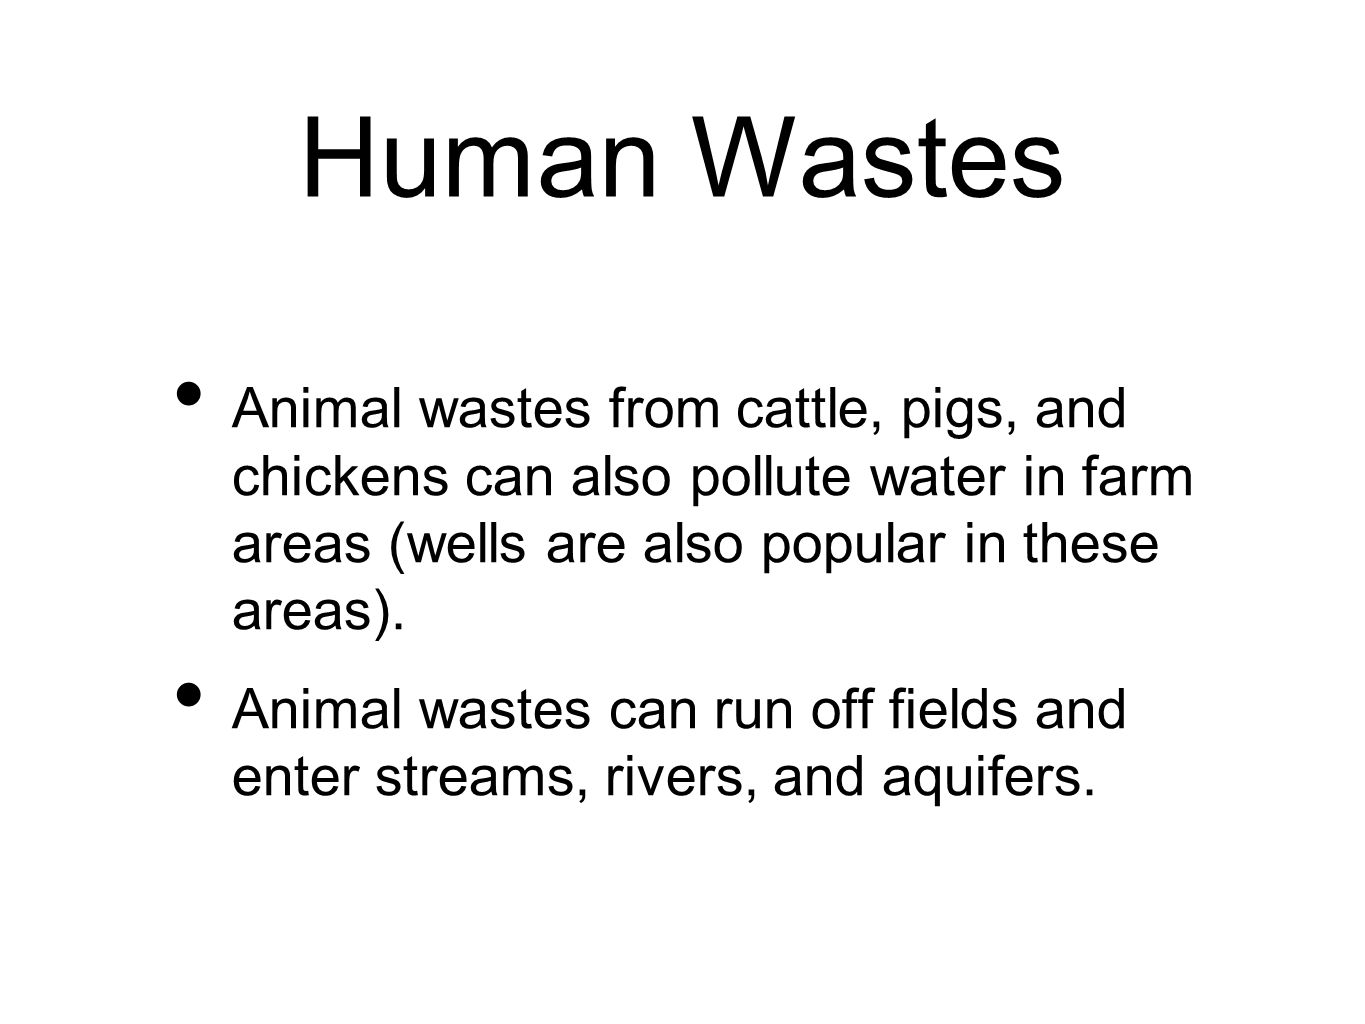 Human Wastes Animal wastes from cattle, pigs, and chickens can also pollute water in farm areas (wells are also popular in these areas).